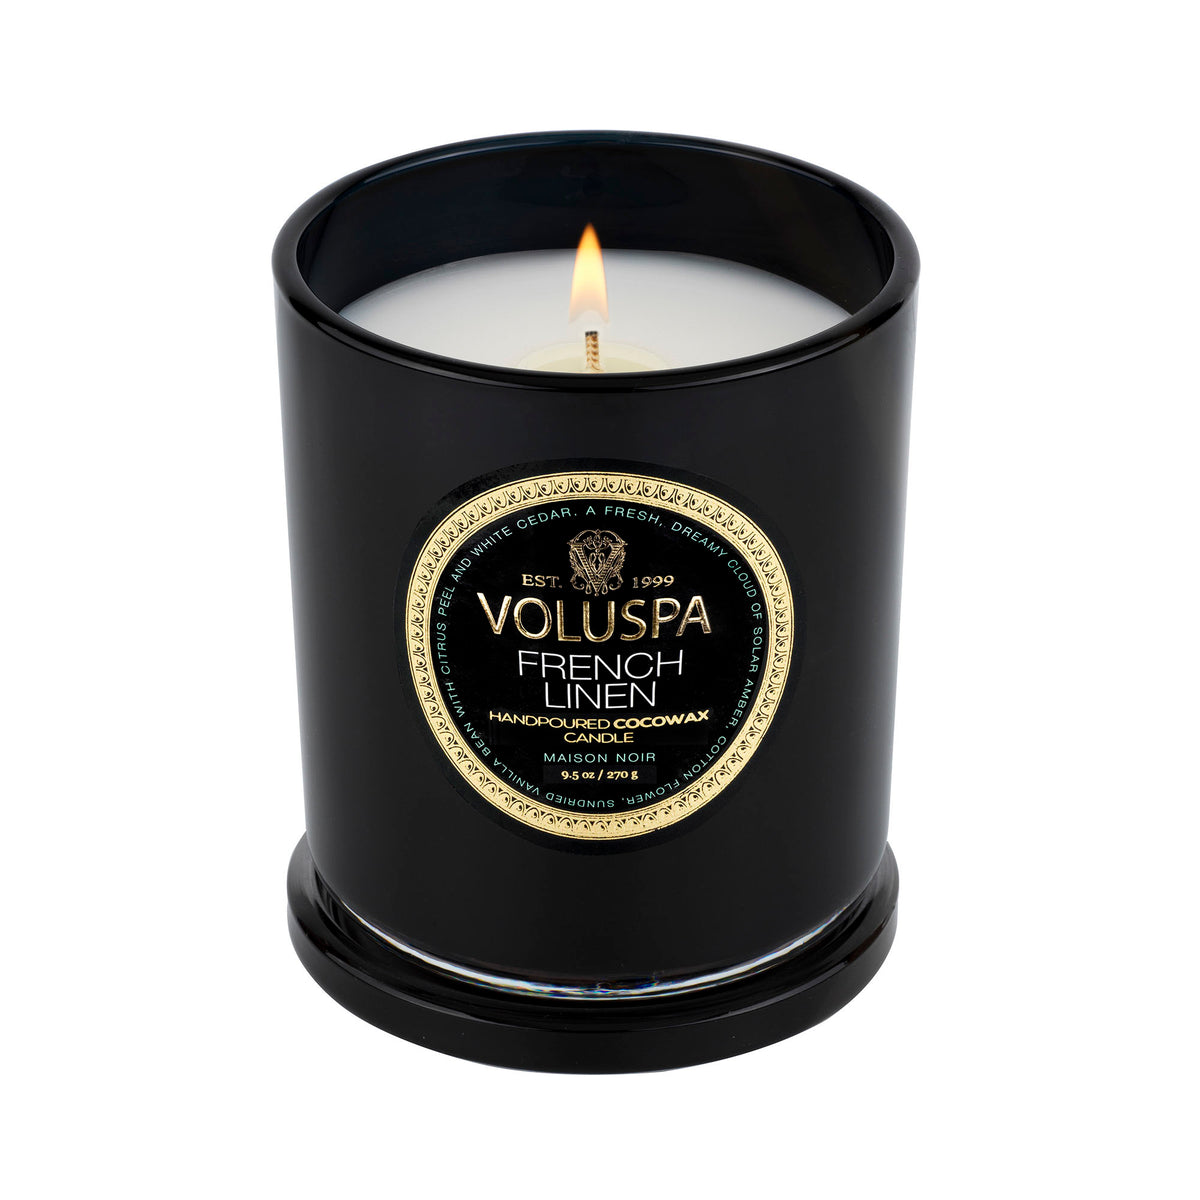 Voluspa - French Linen Classic 9.5oz Candle